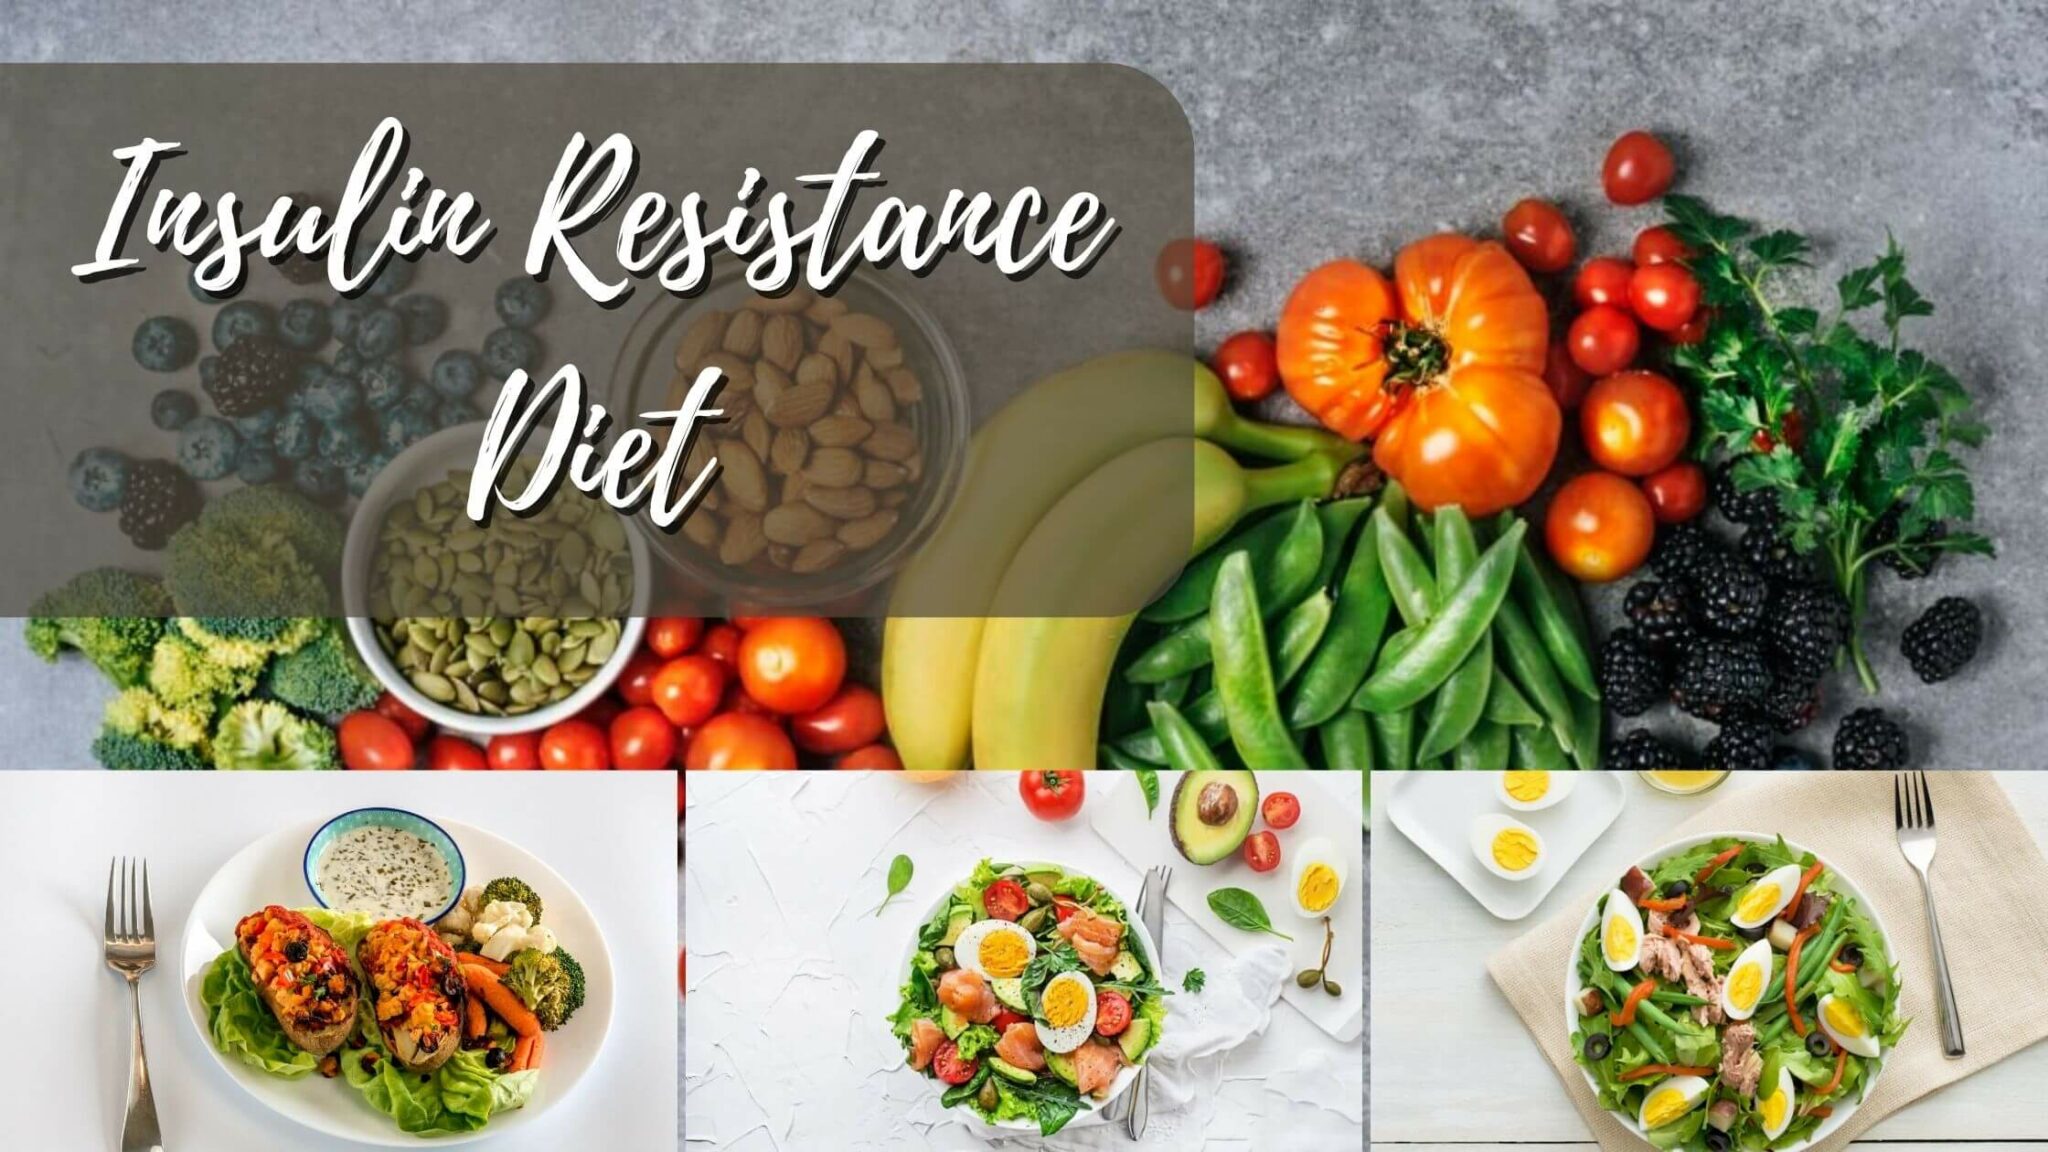 Insulin Resistance Diet - A Complete Guide